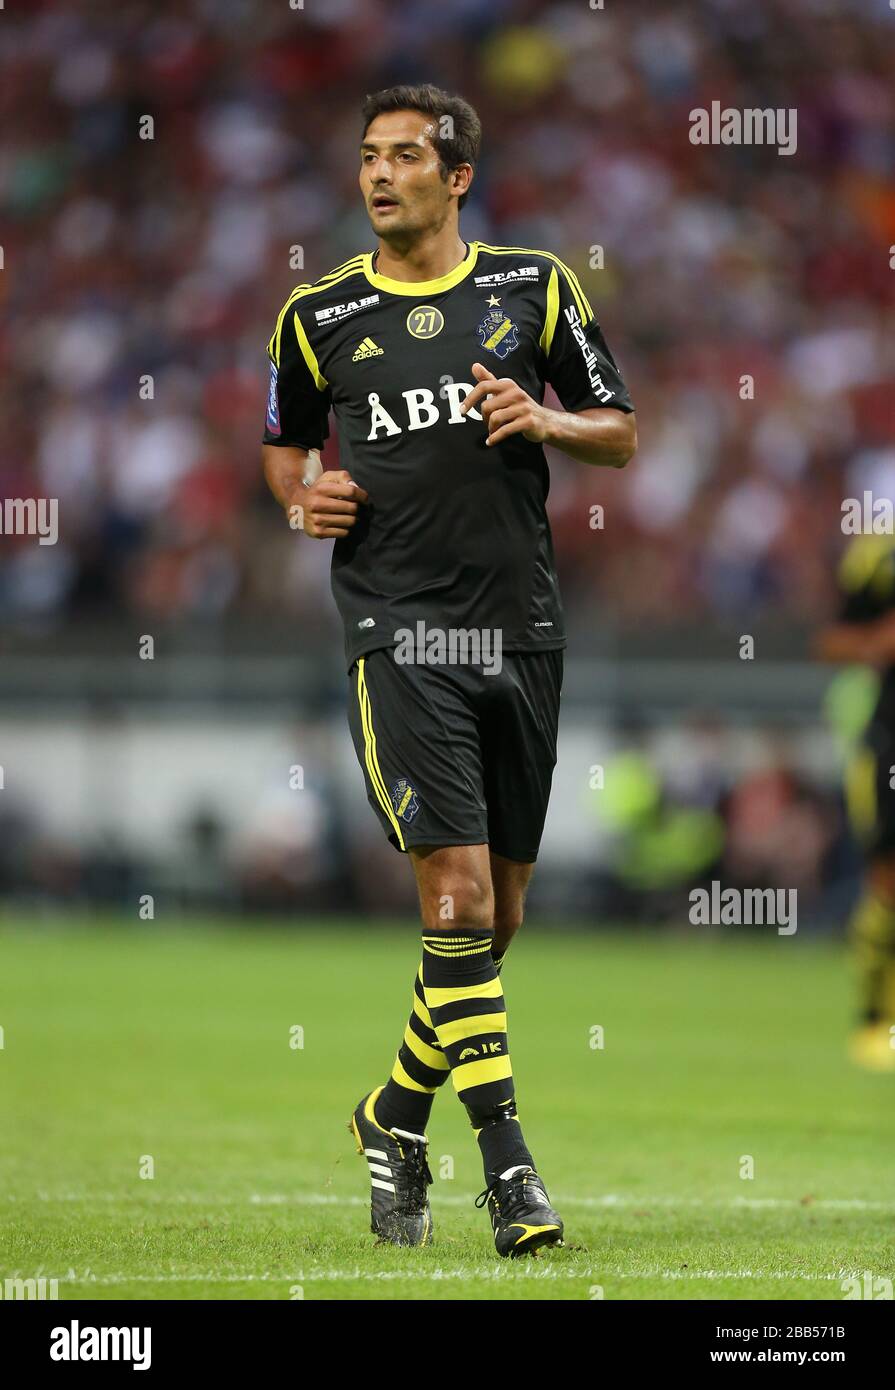 Celso Borges, AIK Solna Stock Photo